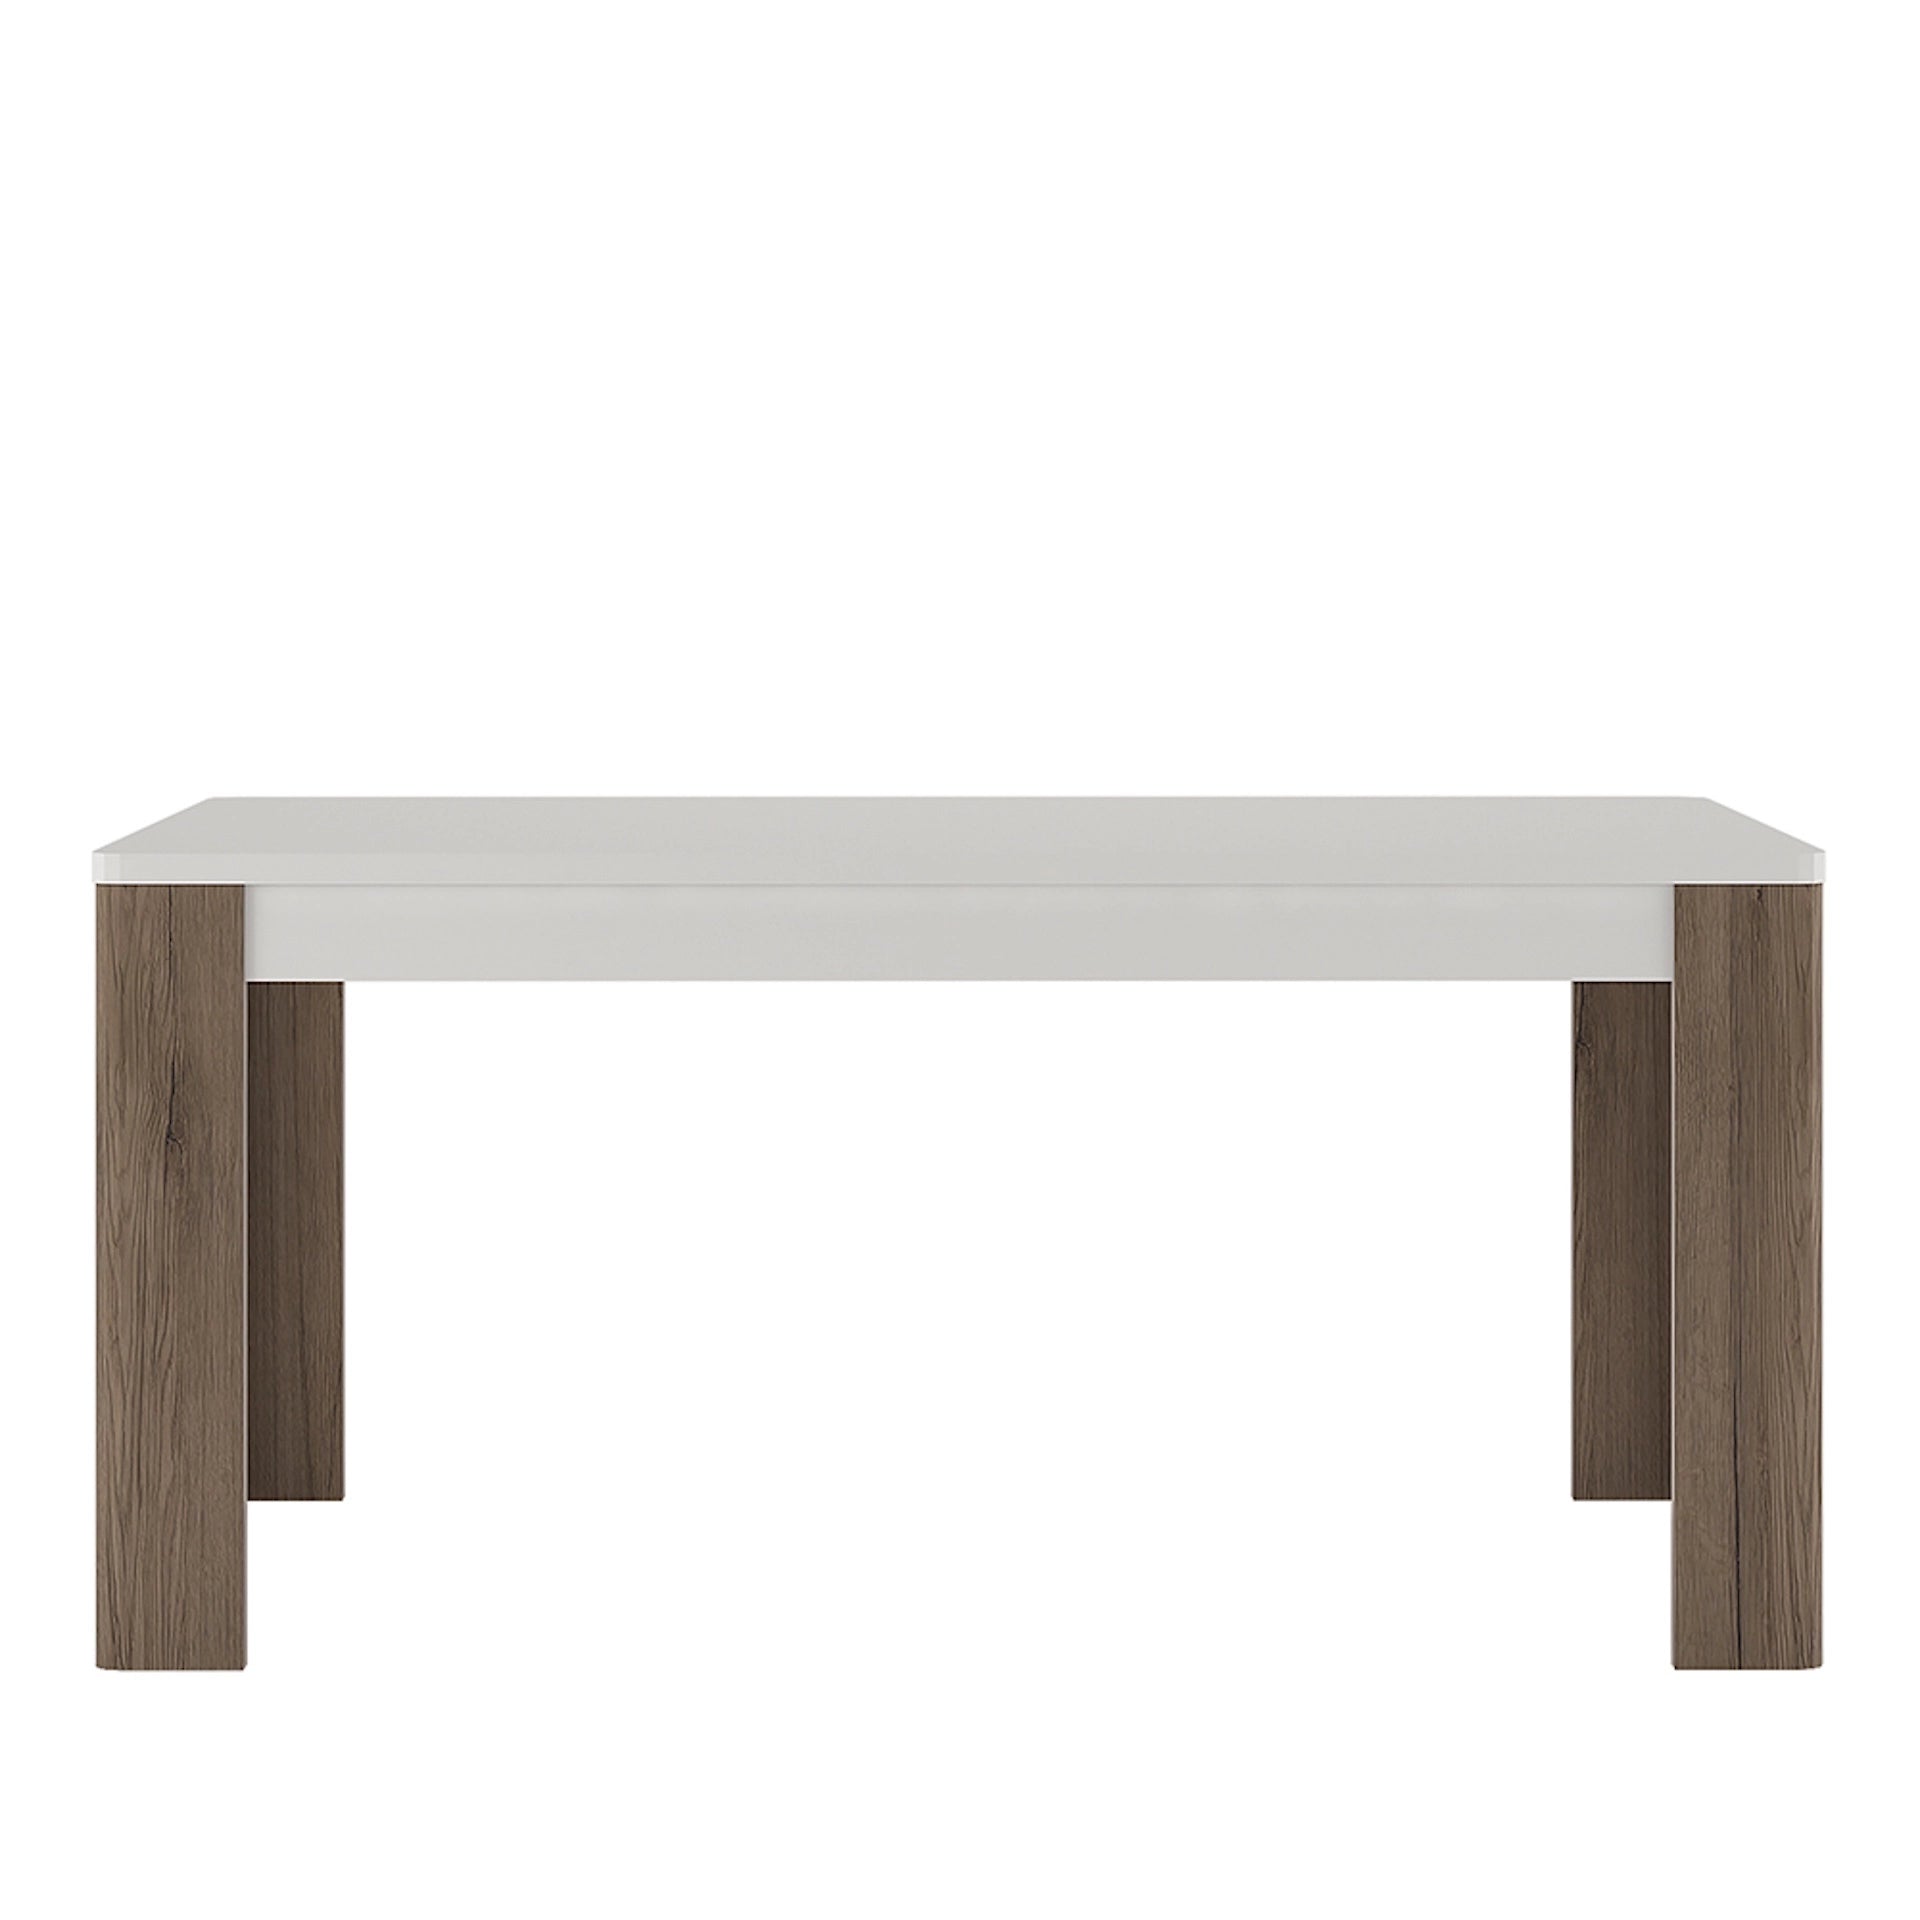 Furniture To Go Toronto 160cm Dining Table in White & Oak